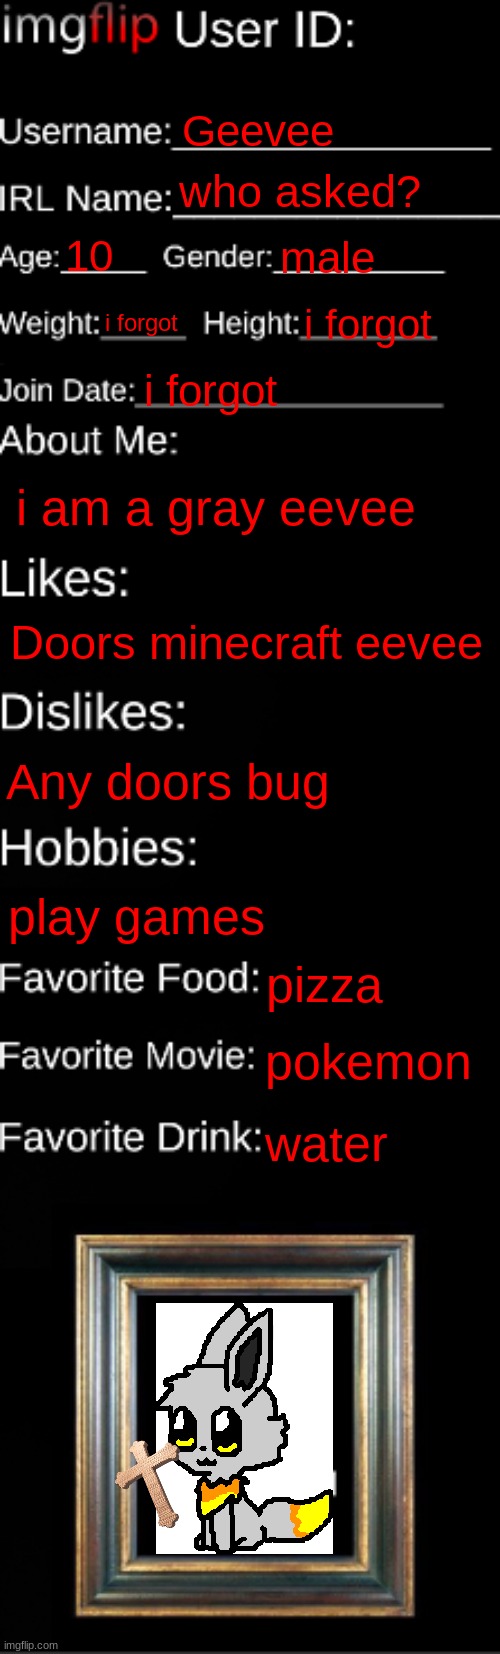 imgflip ID Card | Geevee; who asked? 10; male; i forgot; i forgot; i forgot; i am a gray eevee; Doors minecraft eevee; Any doors bug; play games; pizza; pokemon; water | image tagged in imgflip id card | made w/ Imgflip meme maker